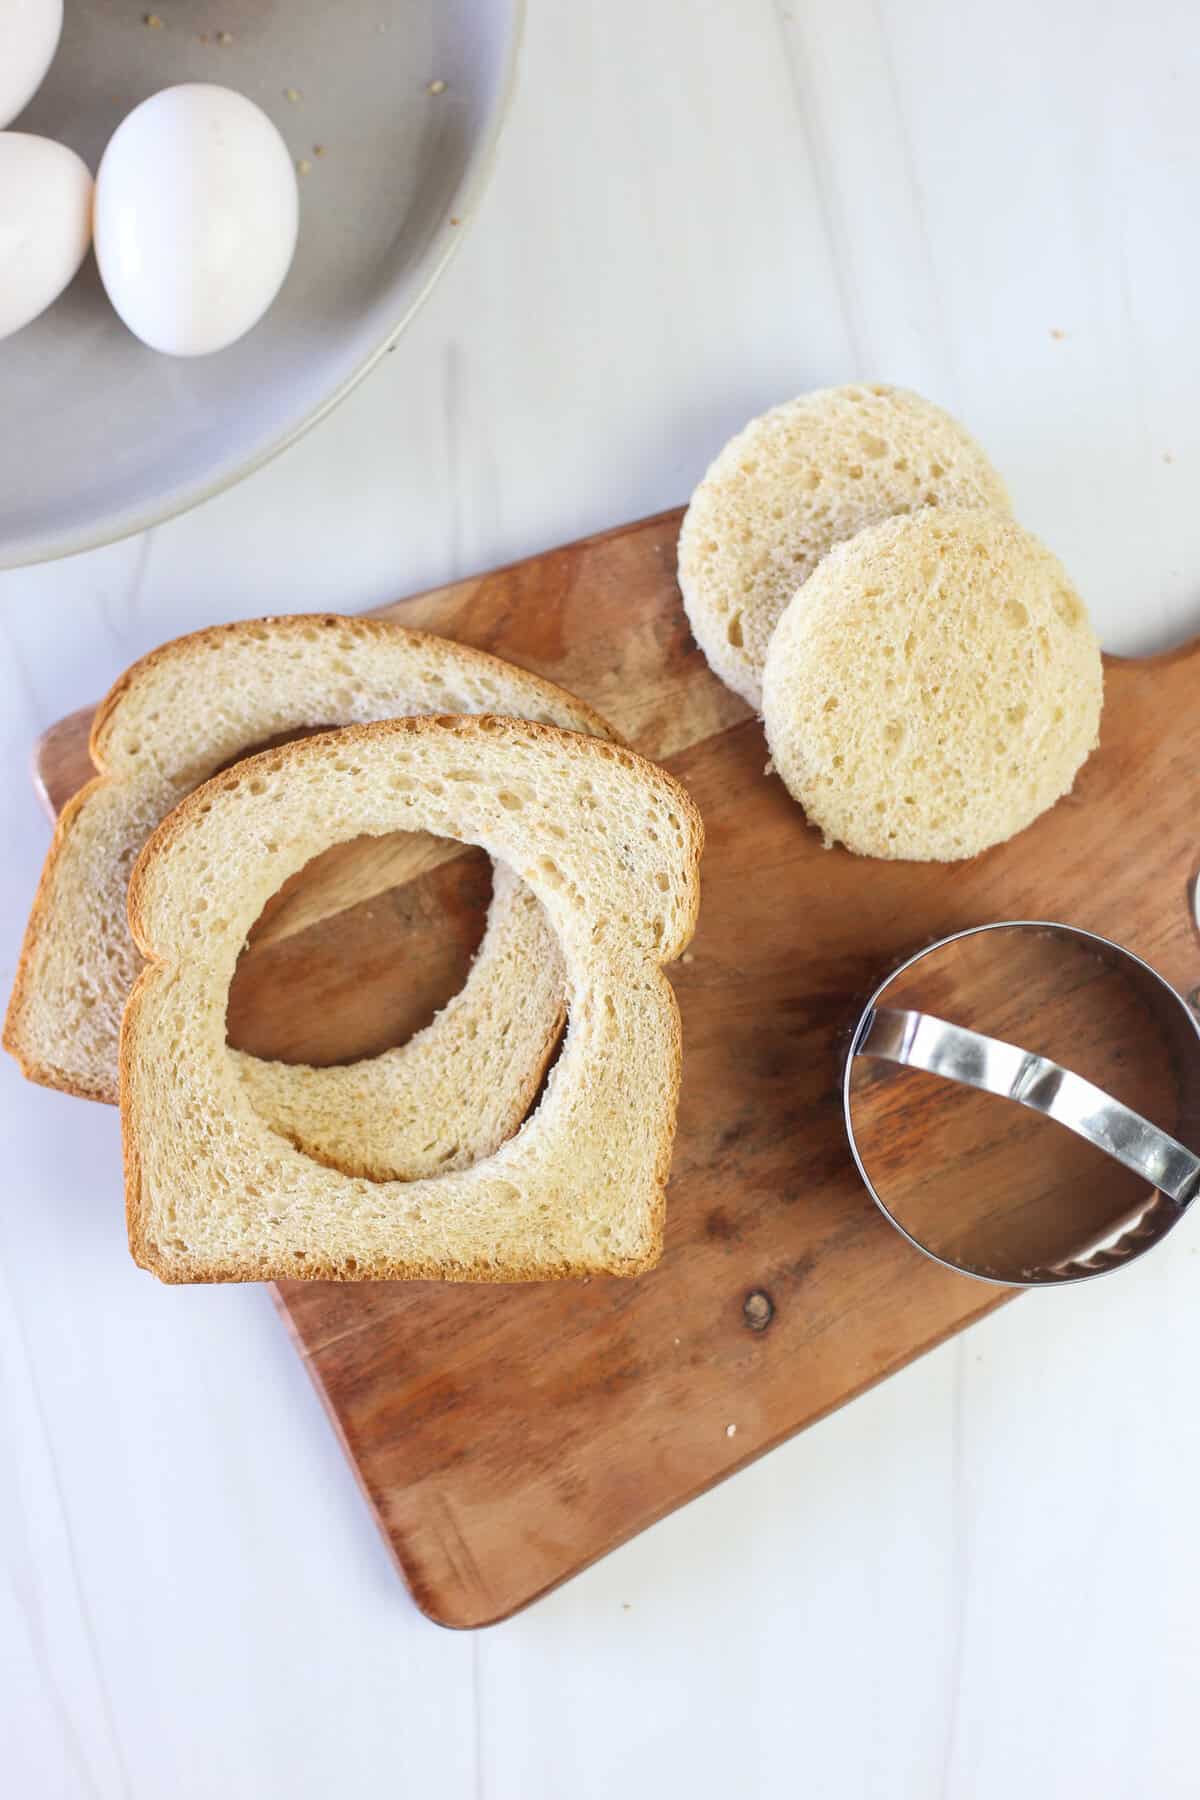 Bread with circles cut out of the center to prep for egg in a hole.